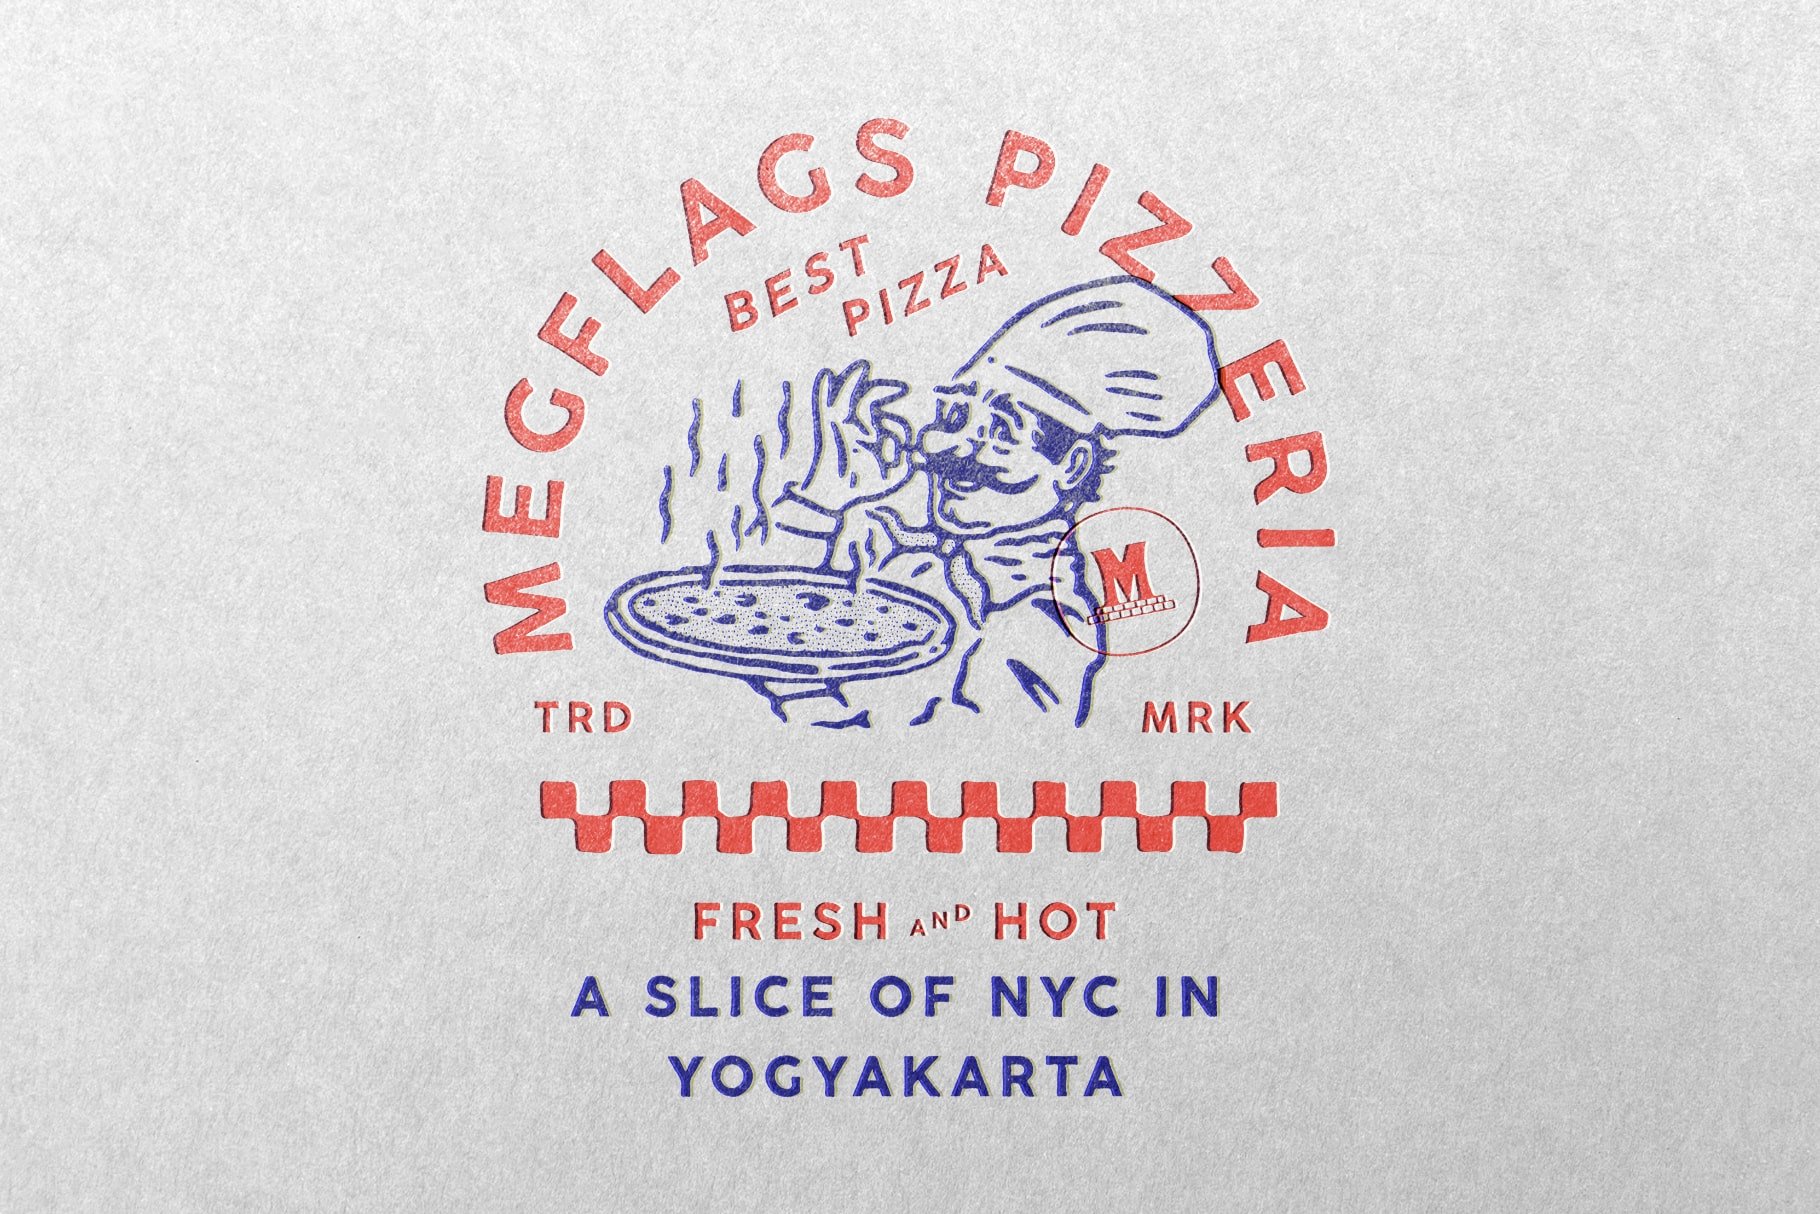 A logo for a pizza restaurant with a picture of a chef.